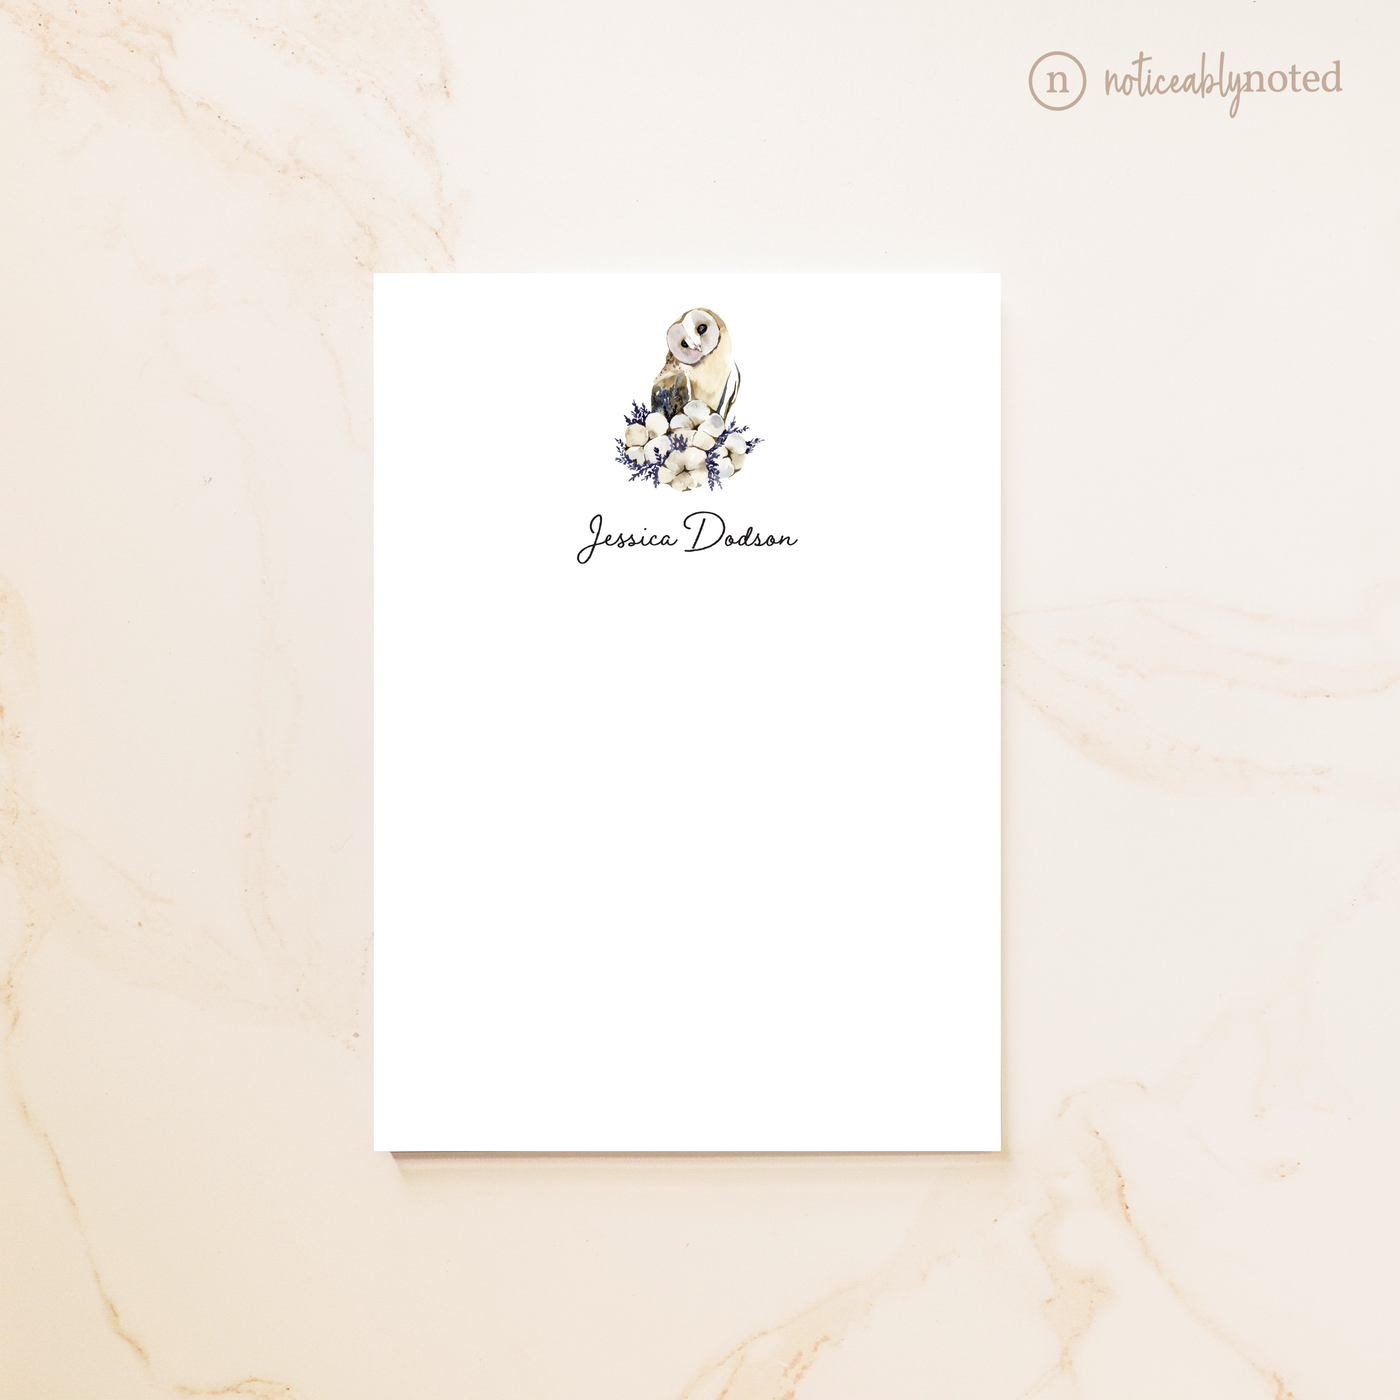 Owl Notepad | Noticeably Noted